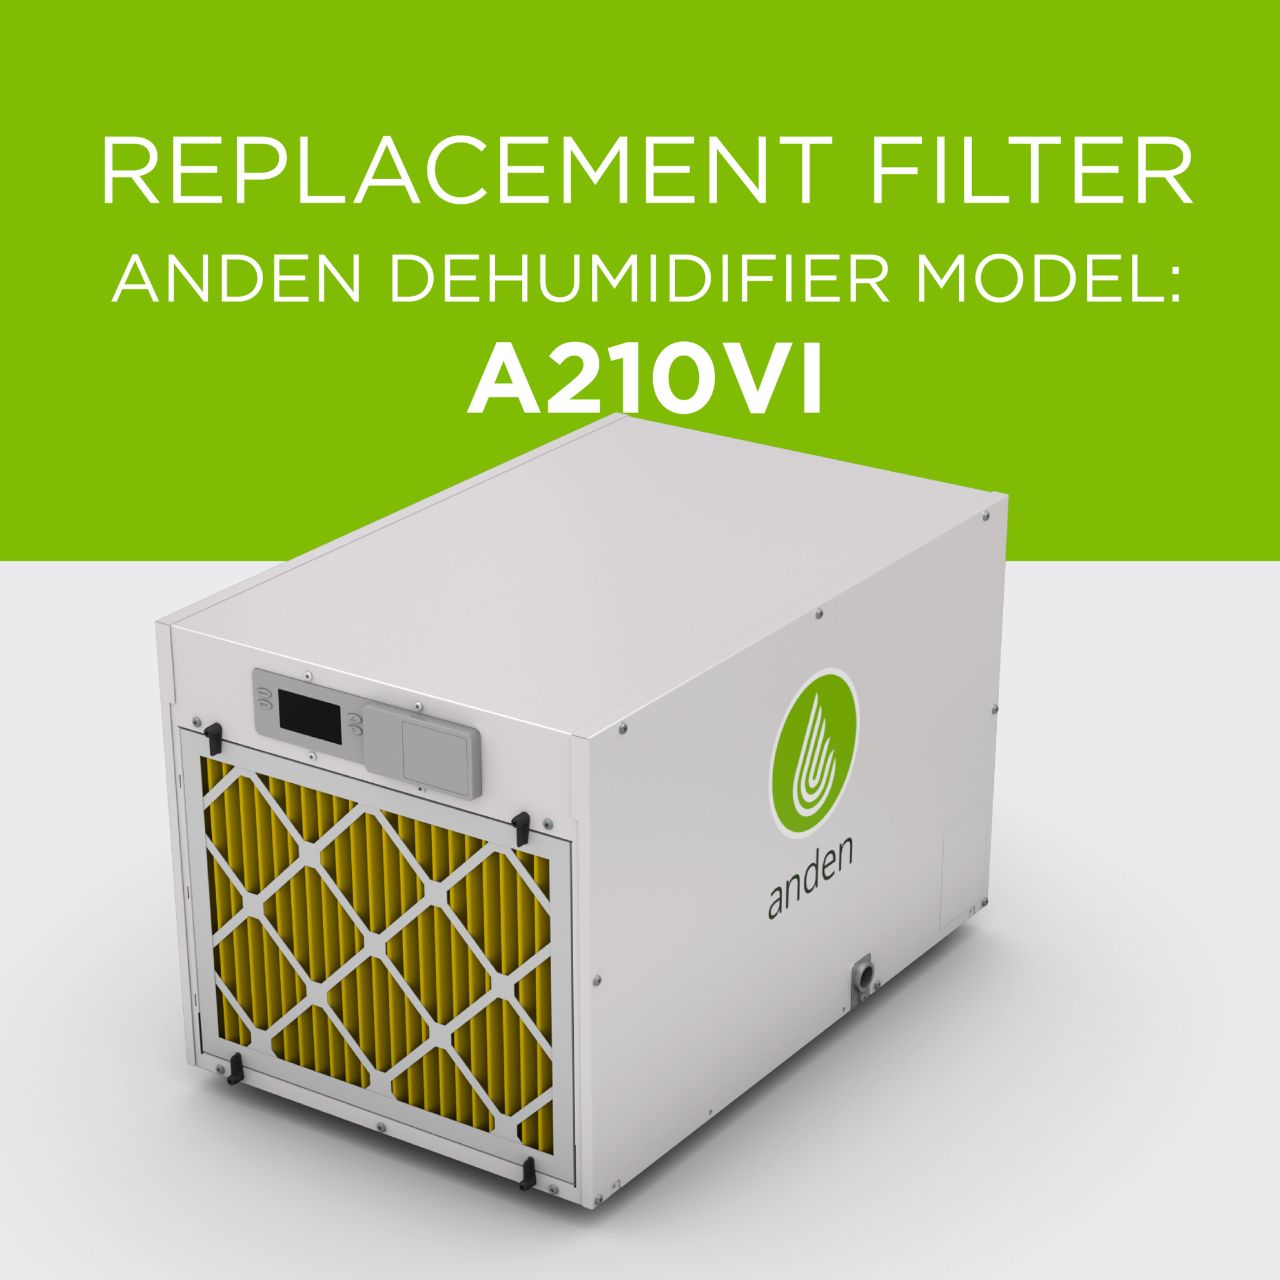 Anden 5781 Replacement Filter